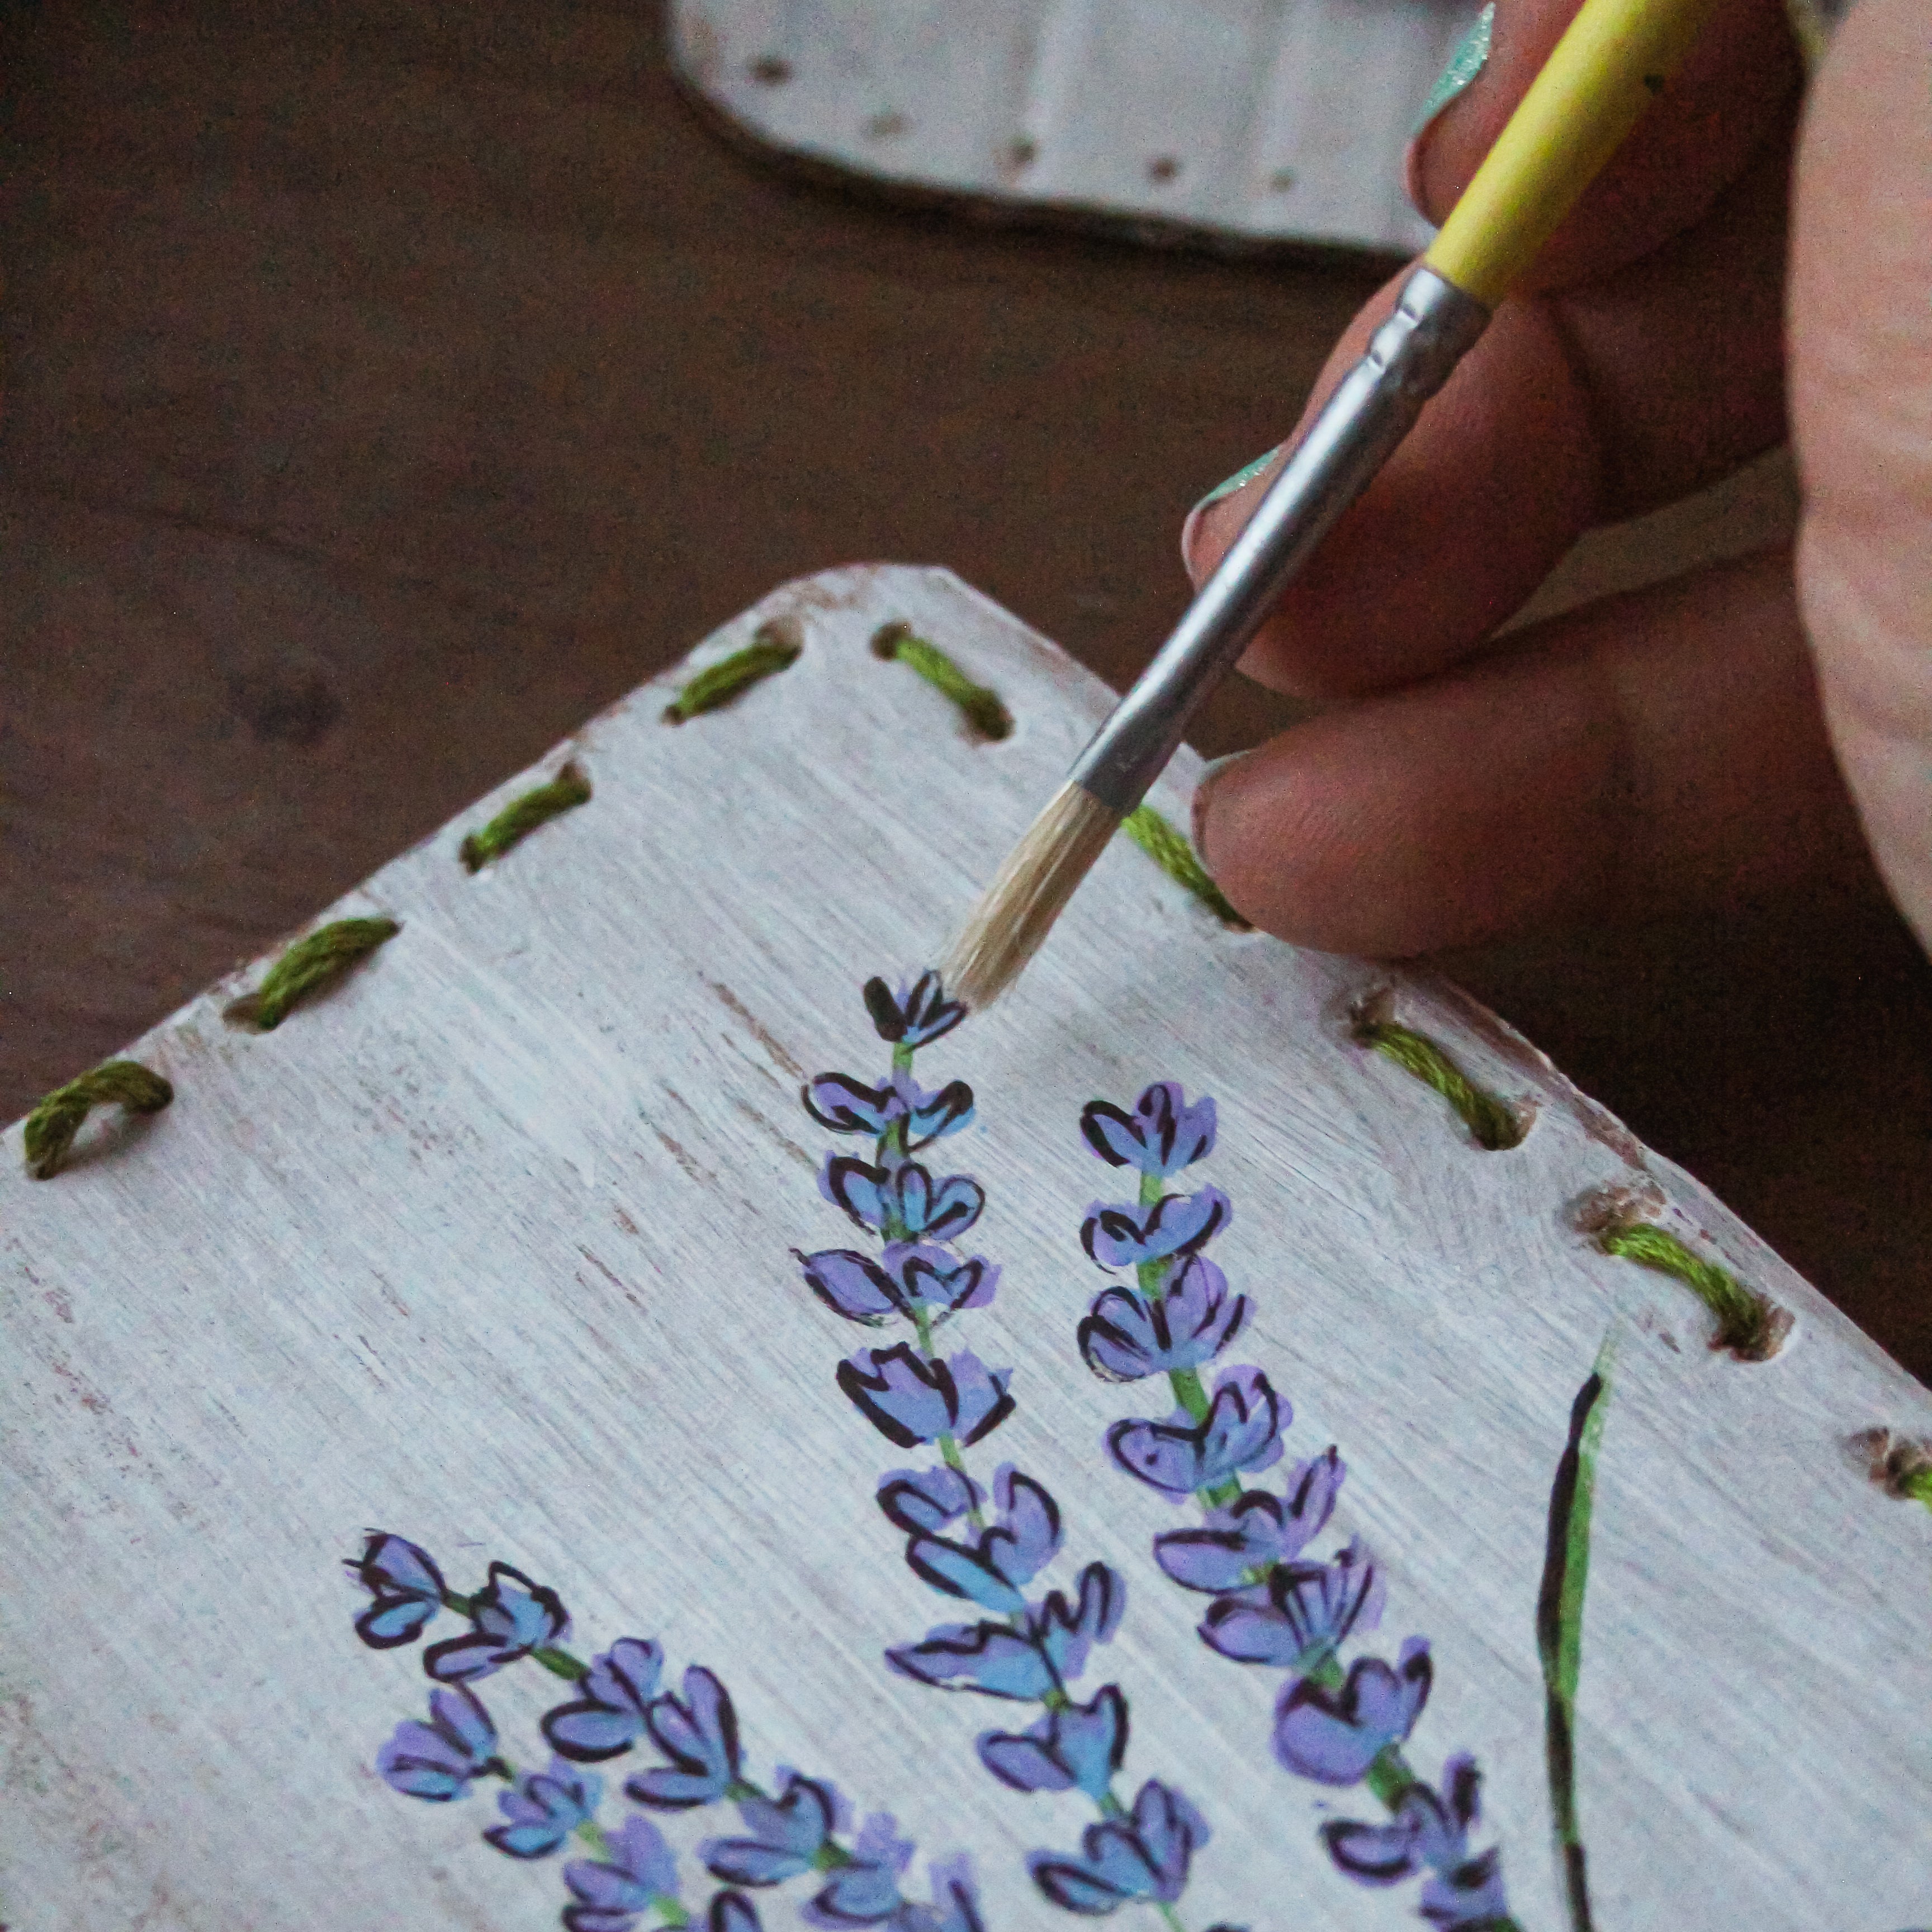 A handmade lavender card sits on a table.